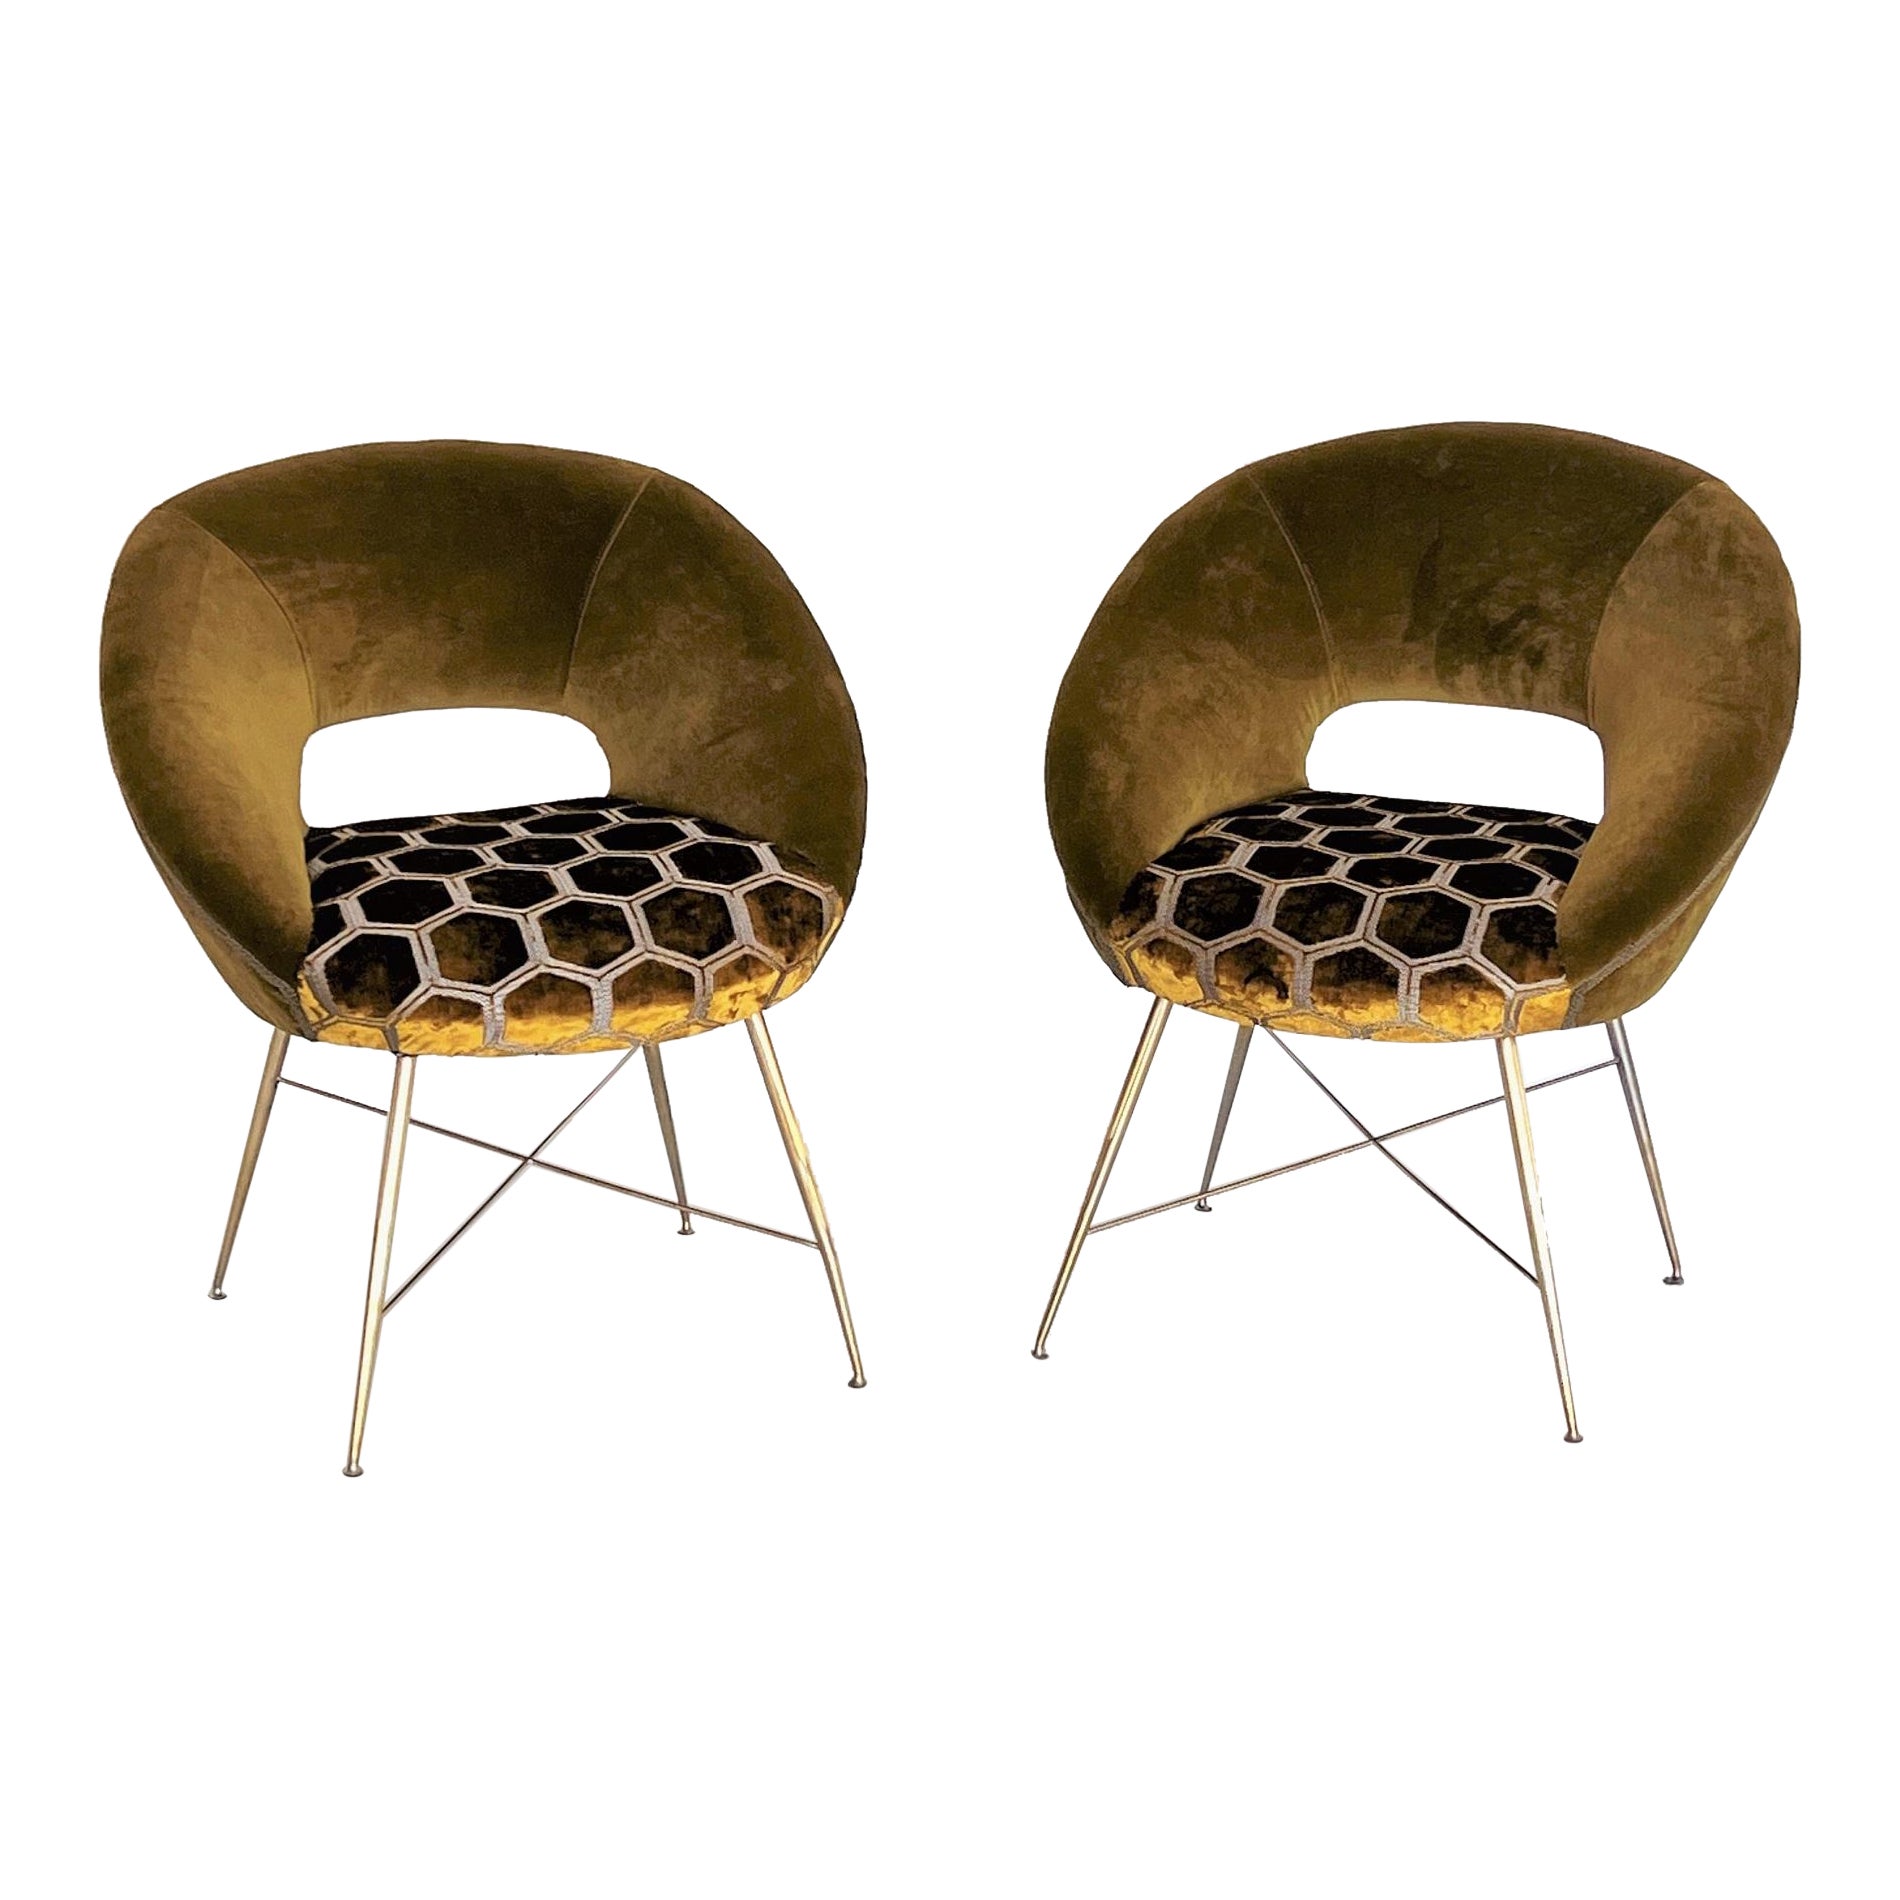 Silvio Cavatorta Pair of Chairs with Brass Legs Re-upholstered in Velvet, 1950s For Sale